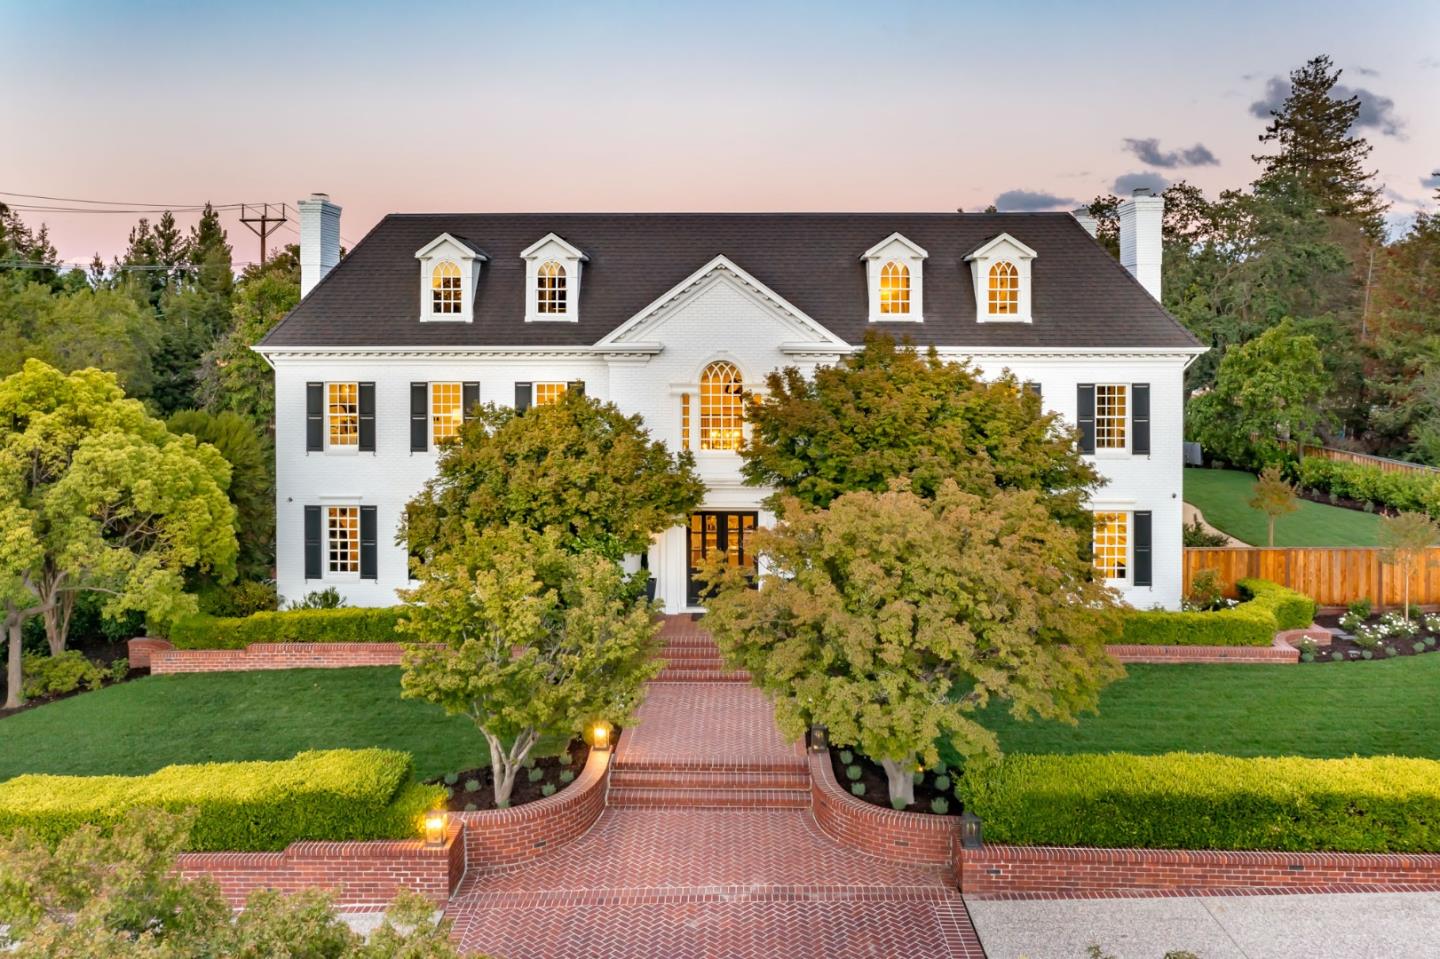 Recently renovated American Colonial masterpiece on 1.14 AC in Atherton. Offering 7 bedrooms, 8.5 baths, and 11,660 sf of living space. Hardwood floors, marble finishes, fine millwork, and high ceilings craft a luxurious ambiance through all 4 levels of the estate. Highlights incl. 4 fireplaces, expansive formal rooms, gourmet kitchen w/new top appliances from Wolf, Sub-Zero, & Viking, handsome office. Incredible master suite w/2 walk-in closets, 2 bathrooms, and balcony access. Theater w/projection room, fitness center w/sauna, wine cellar w/tasting area. Newly landscaped backyard w/new pool, outdoor kitchen, fire pit. Multiple rooms open to grounds for indoor/outdoor living. 5-car garage, gated motor court for extended parking. Moments to downtown Menlo Park & Palo Alto, convenient to Stanford, Menlo Circus Club, Sand Hill Road. Top ranked public & private schools incl. Las Lomitas Elementary and Sacred Heart are minutes away.